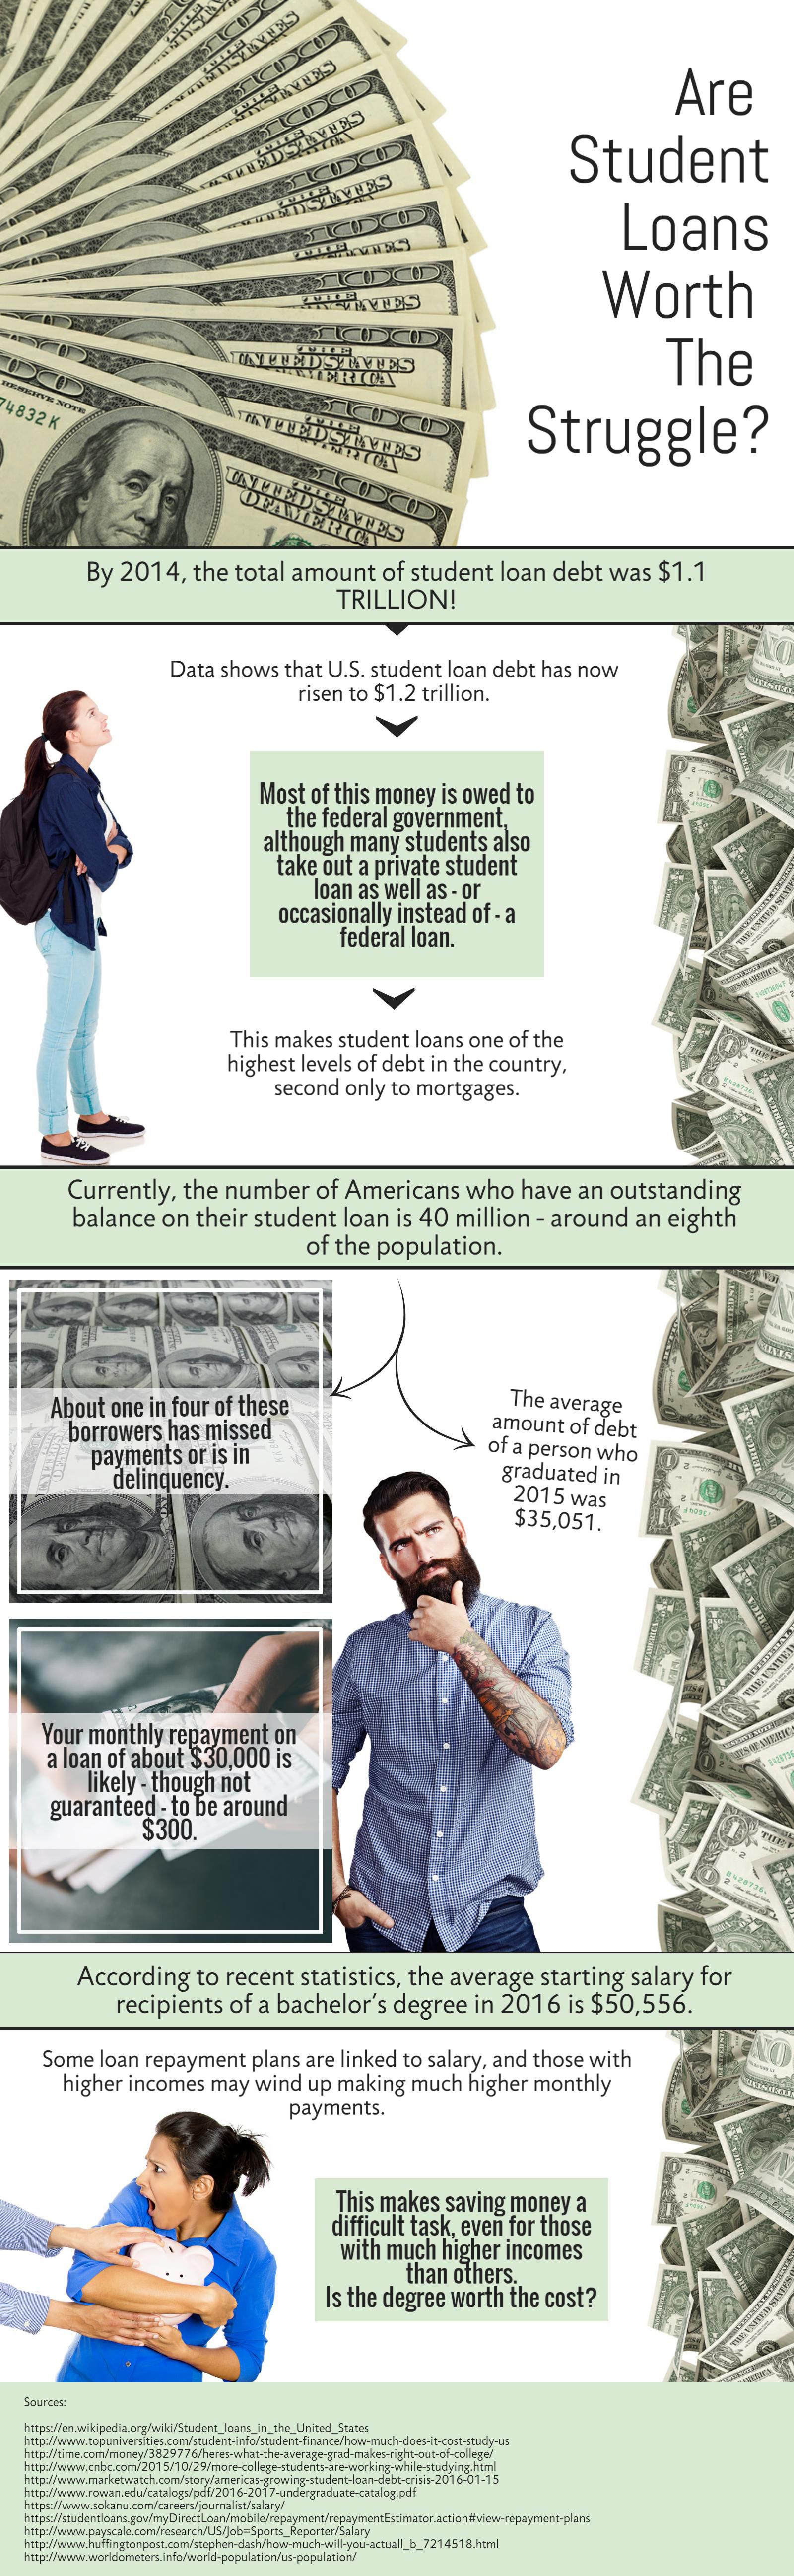 How Much Do Student Loans Cost Taxpayers - Infographic